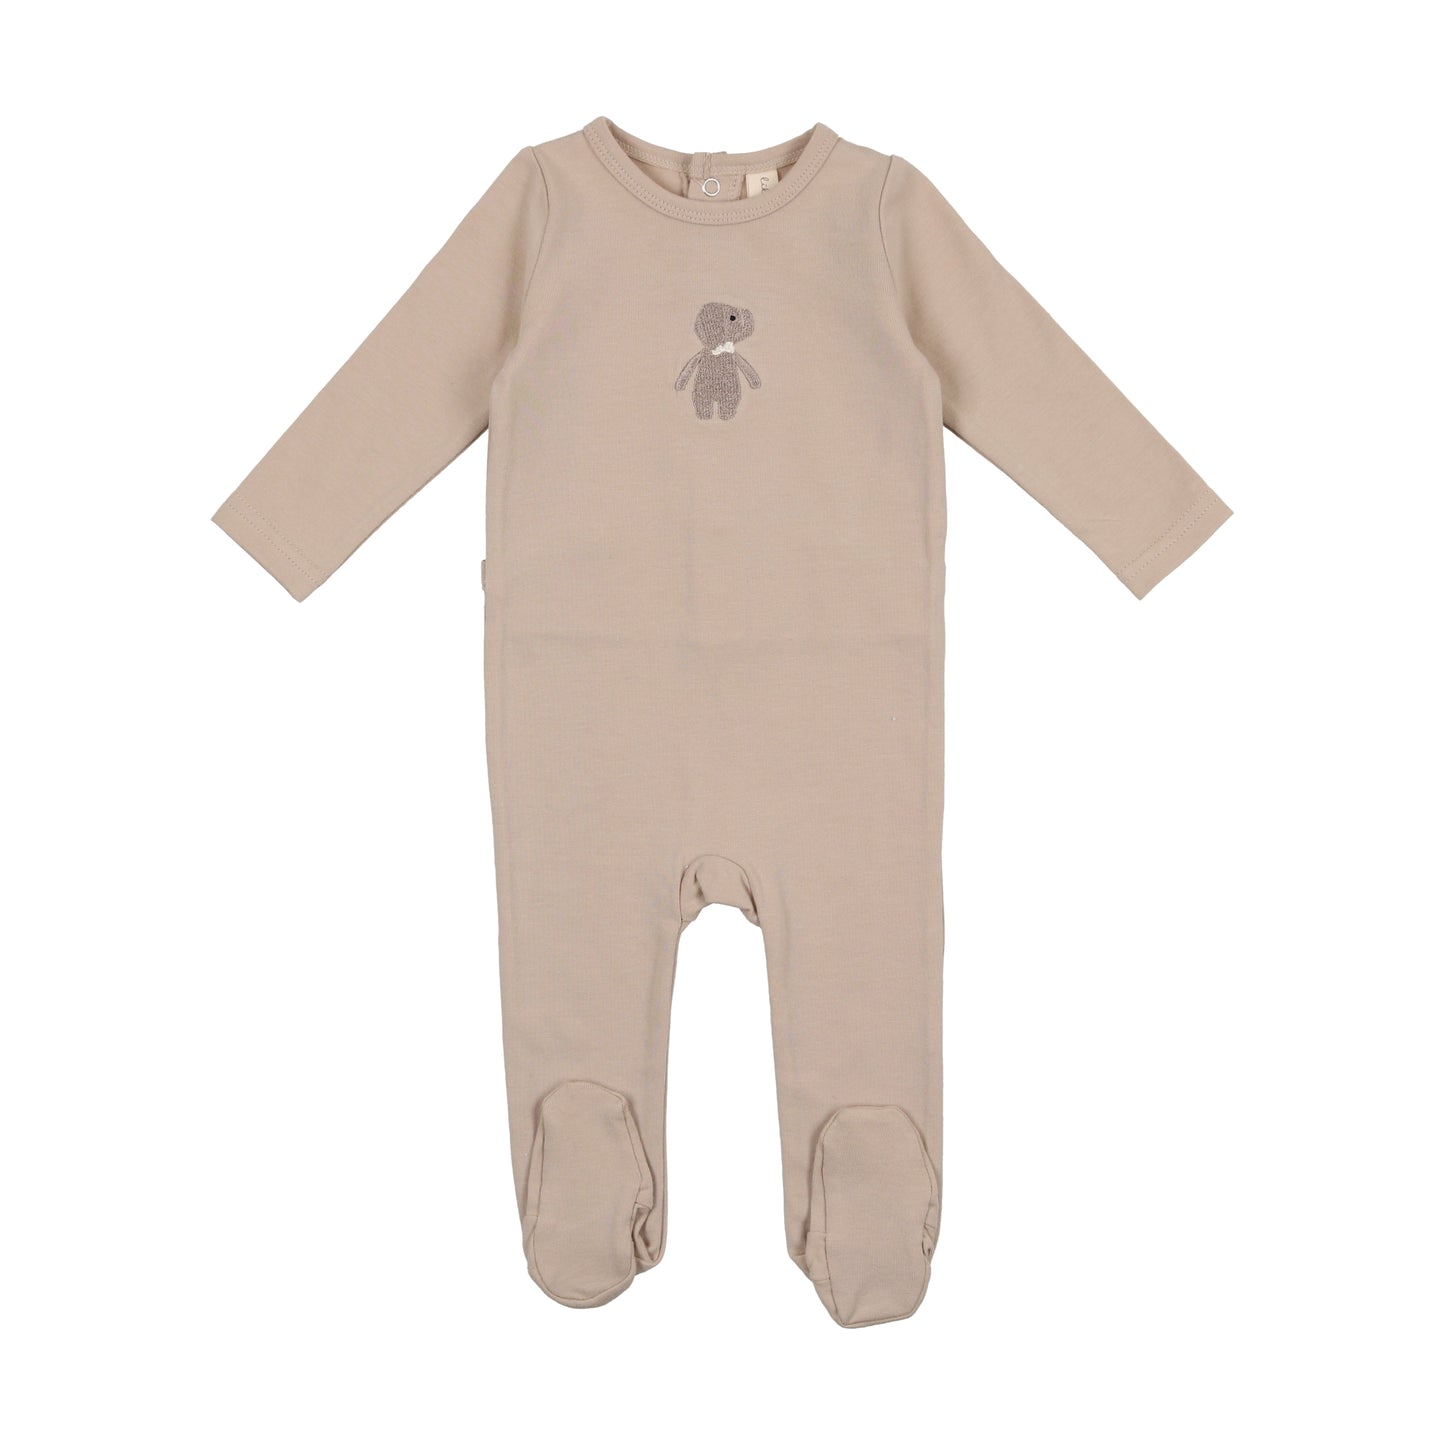 Lil Legs Embroidered Cotton Footie Collection